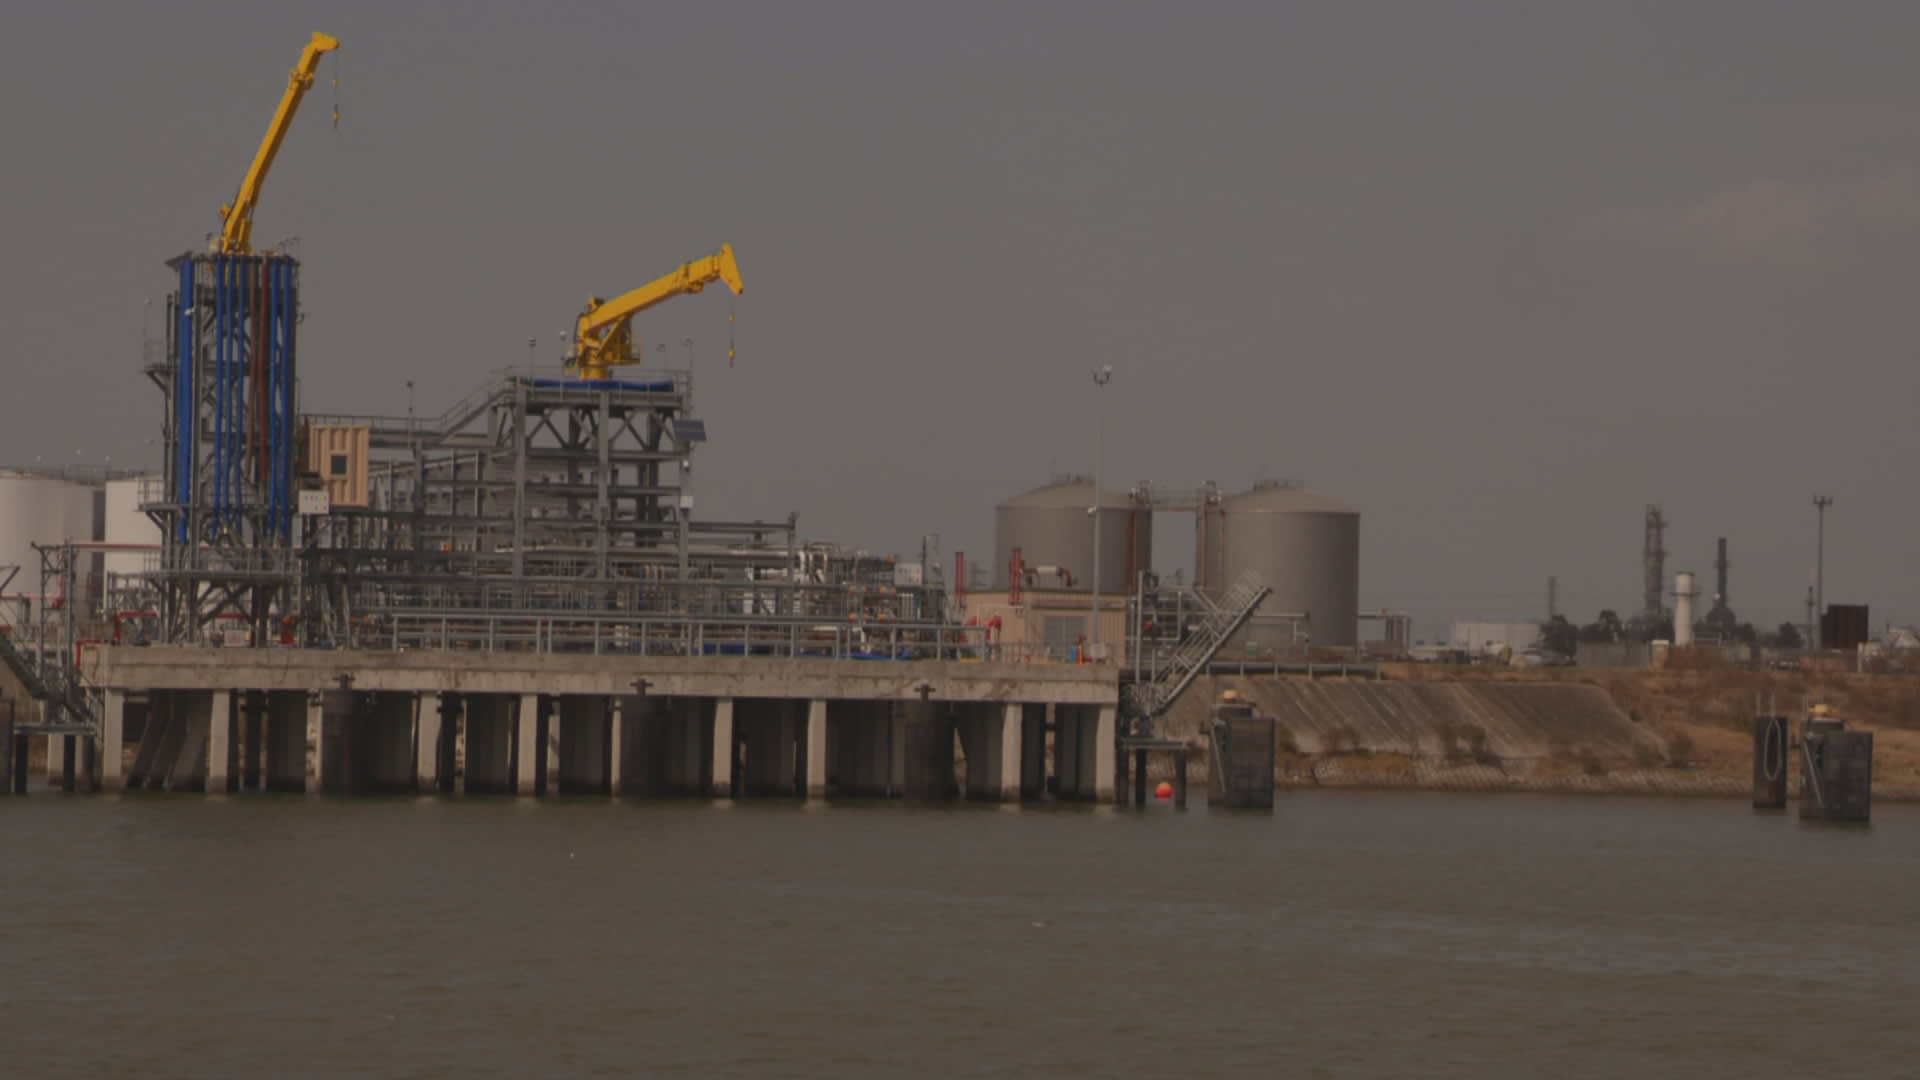 An industrial facility on the Houston Ship Channel where Exxon Mobil is proposing a carbon capture and sequestration network